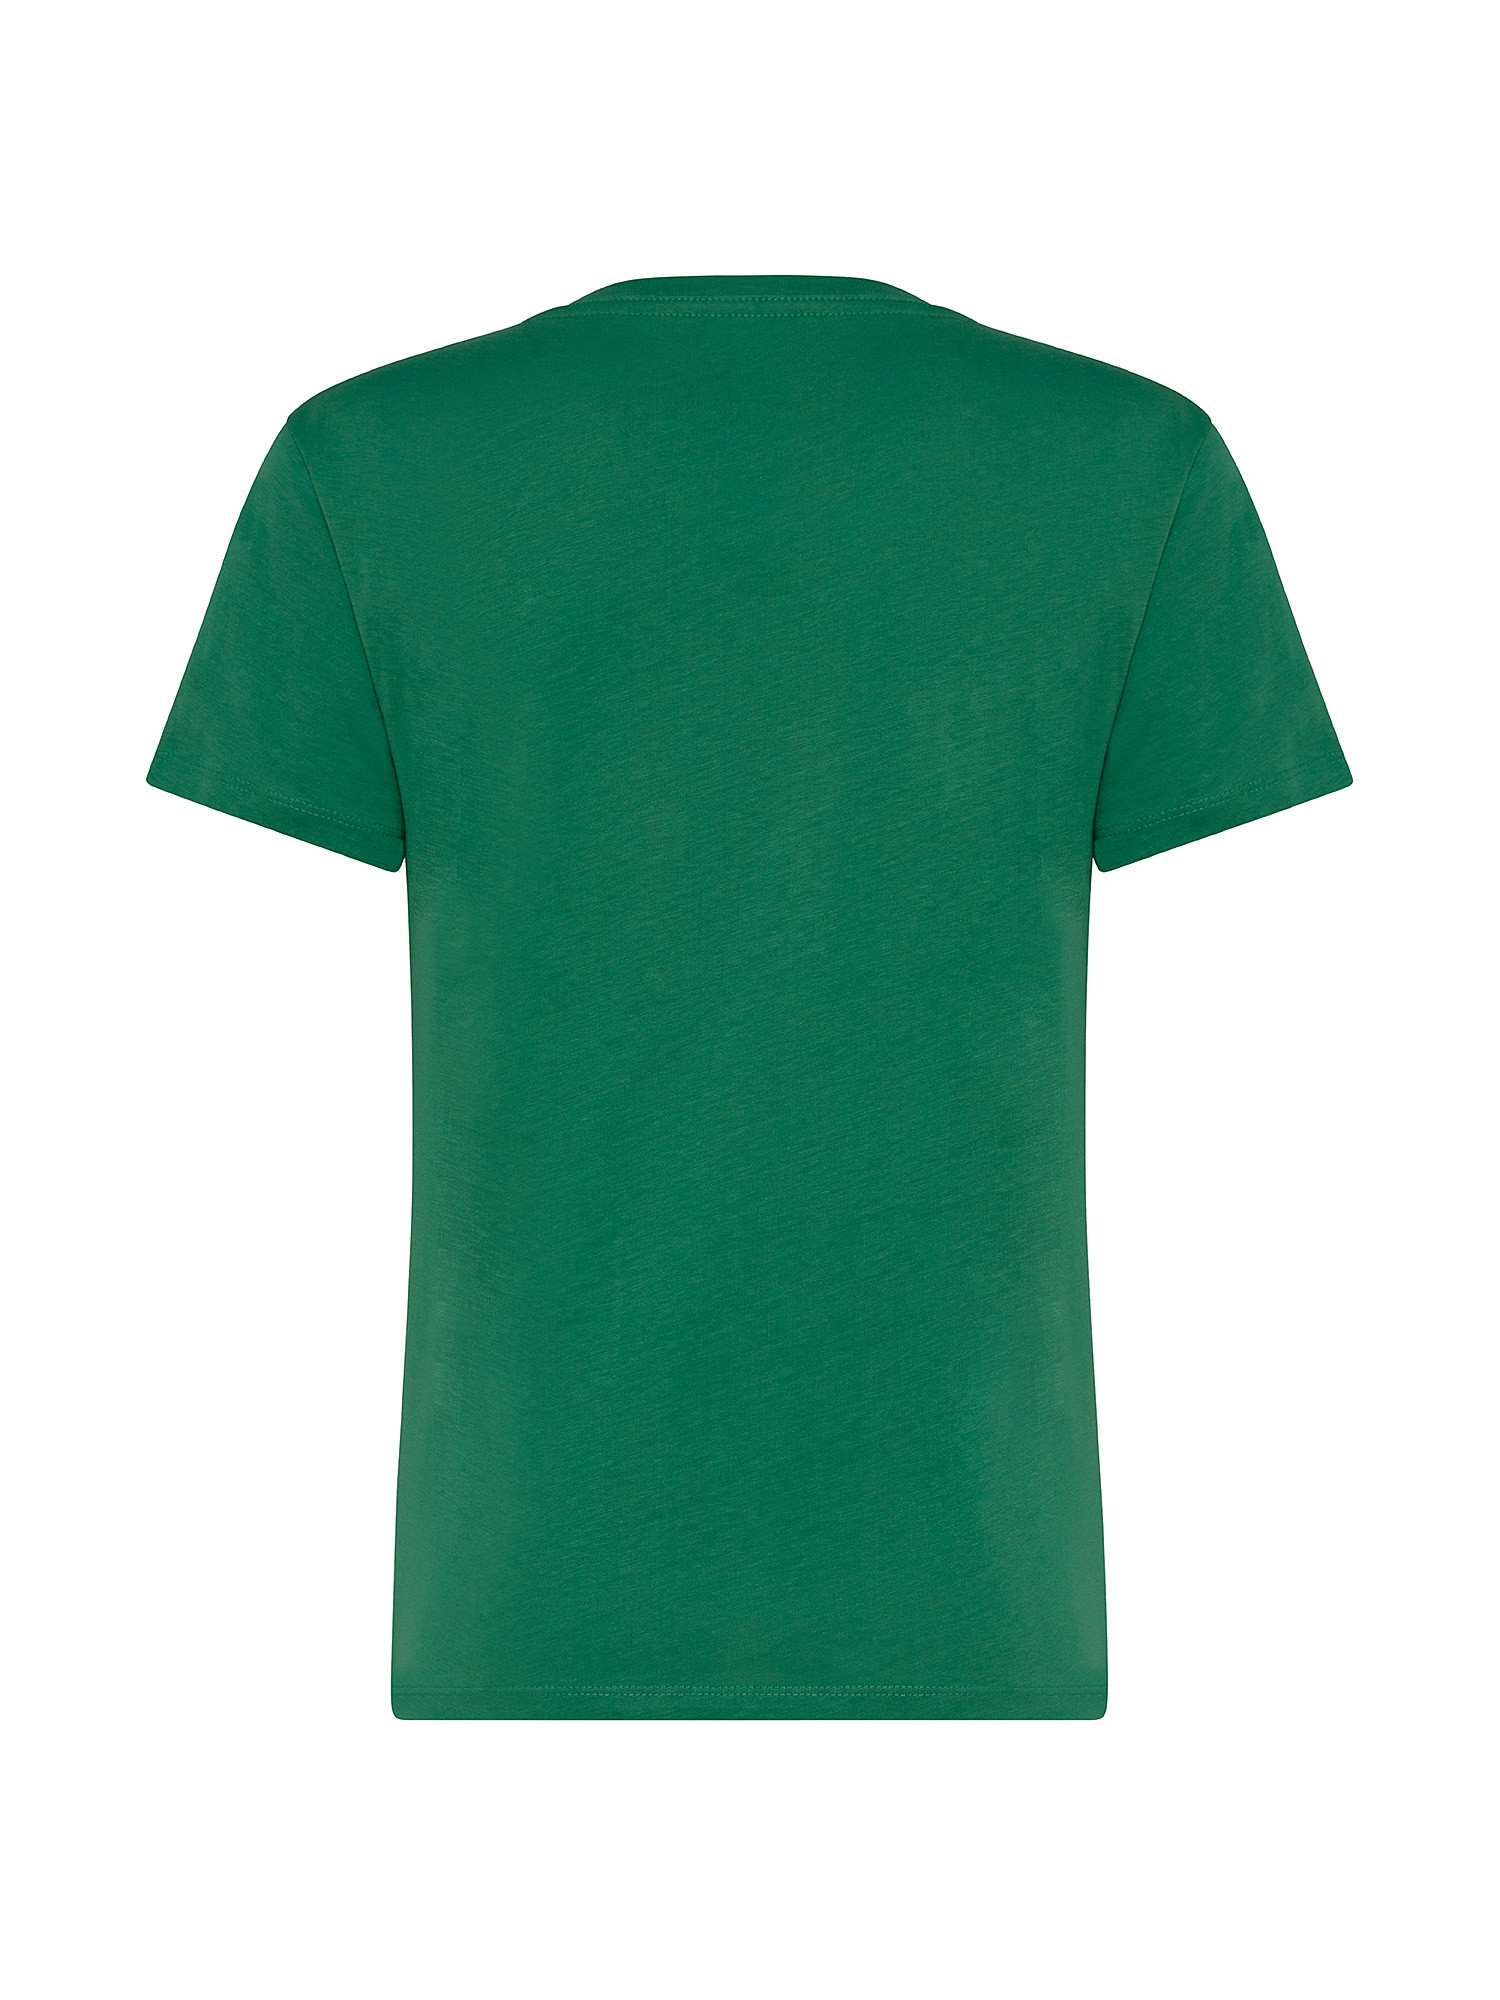 T-shirt with printed logo, Green, large image number 1